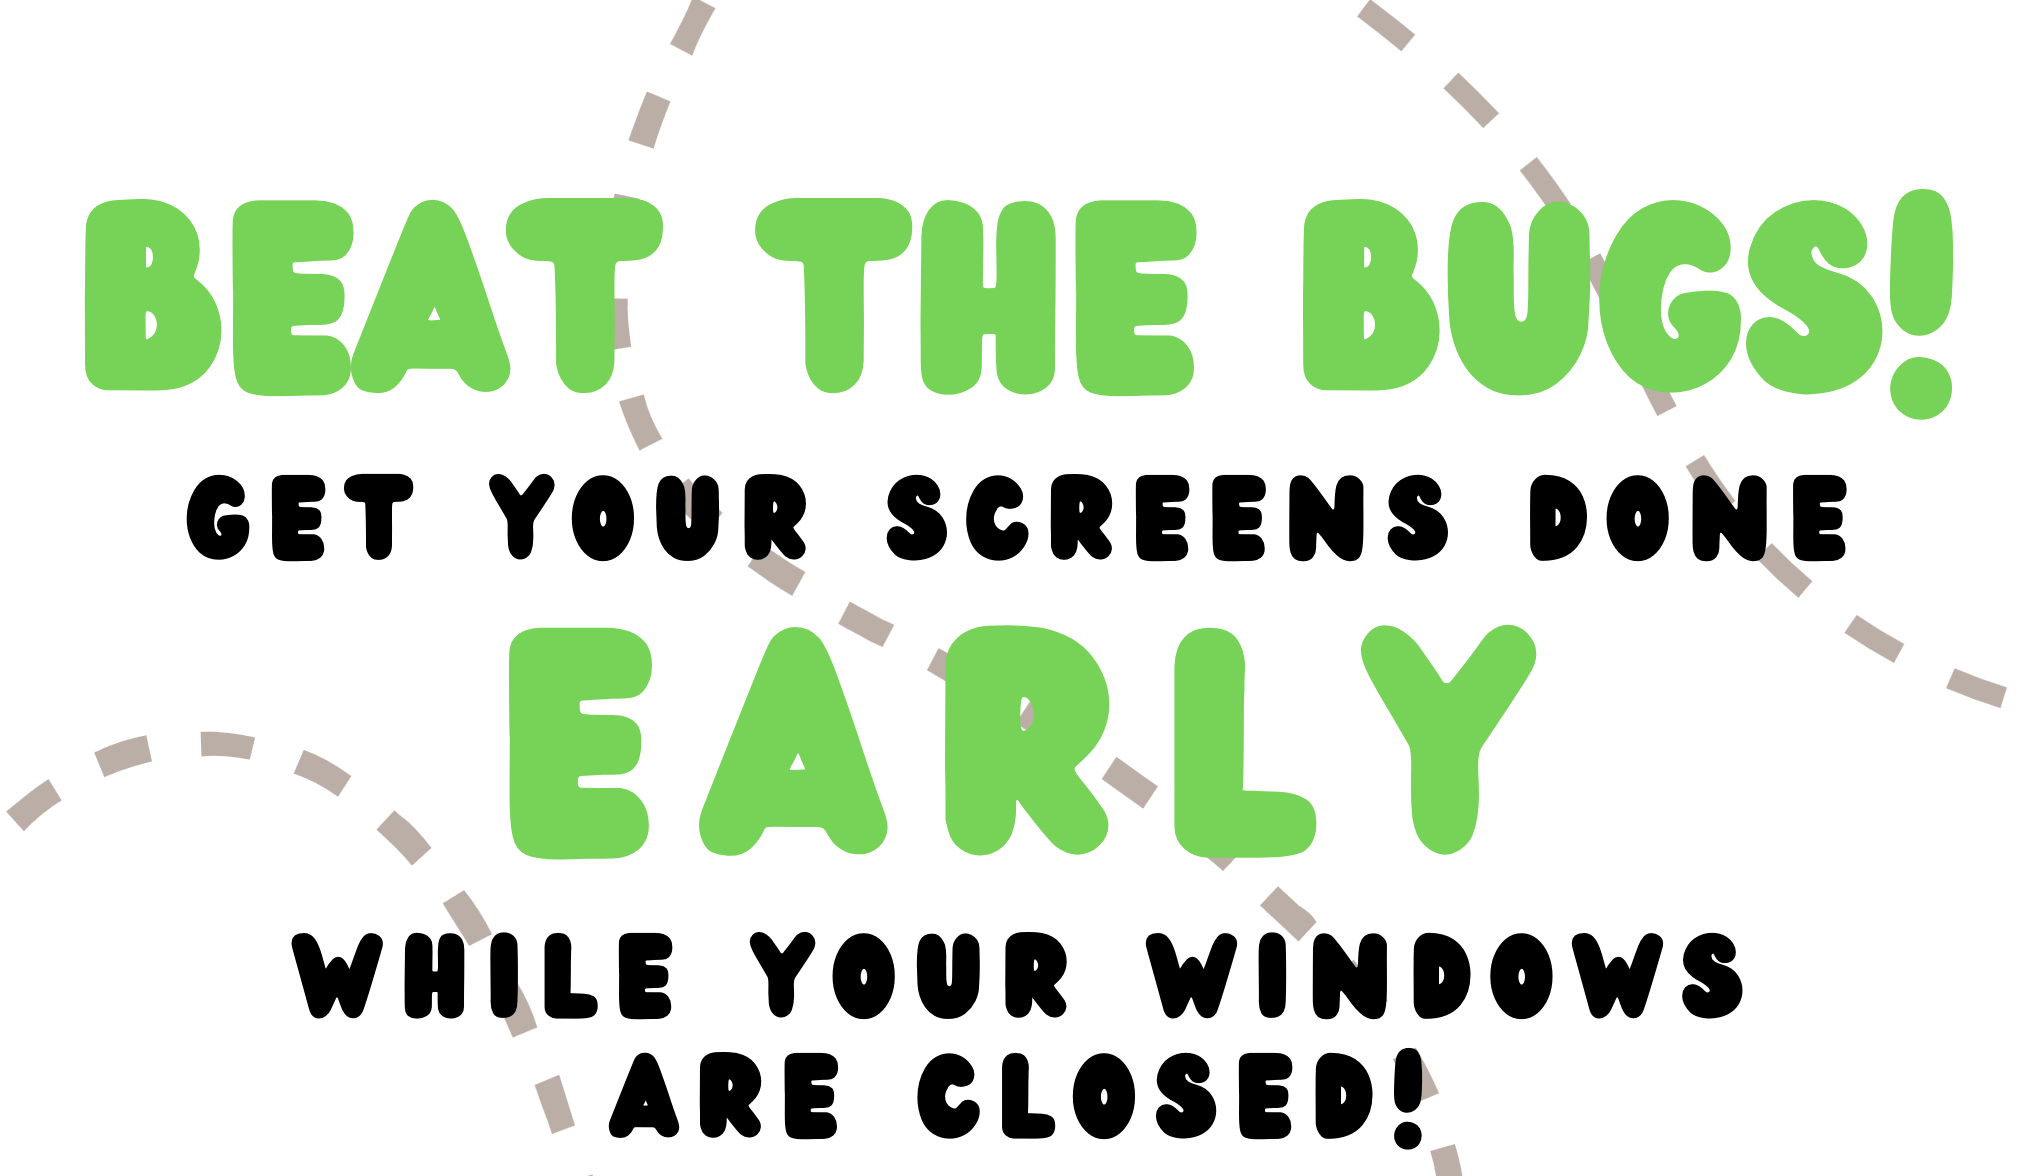 Beat the bugs! Get your screens done early. While your windows are closed! Save 20% on your screen replacements. Only through March 2023 at River Ridge Hardware